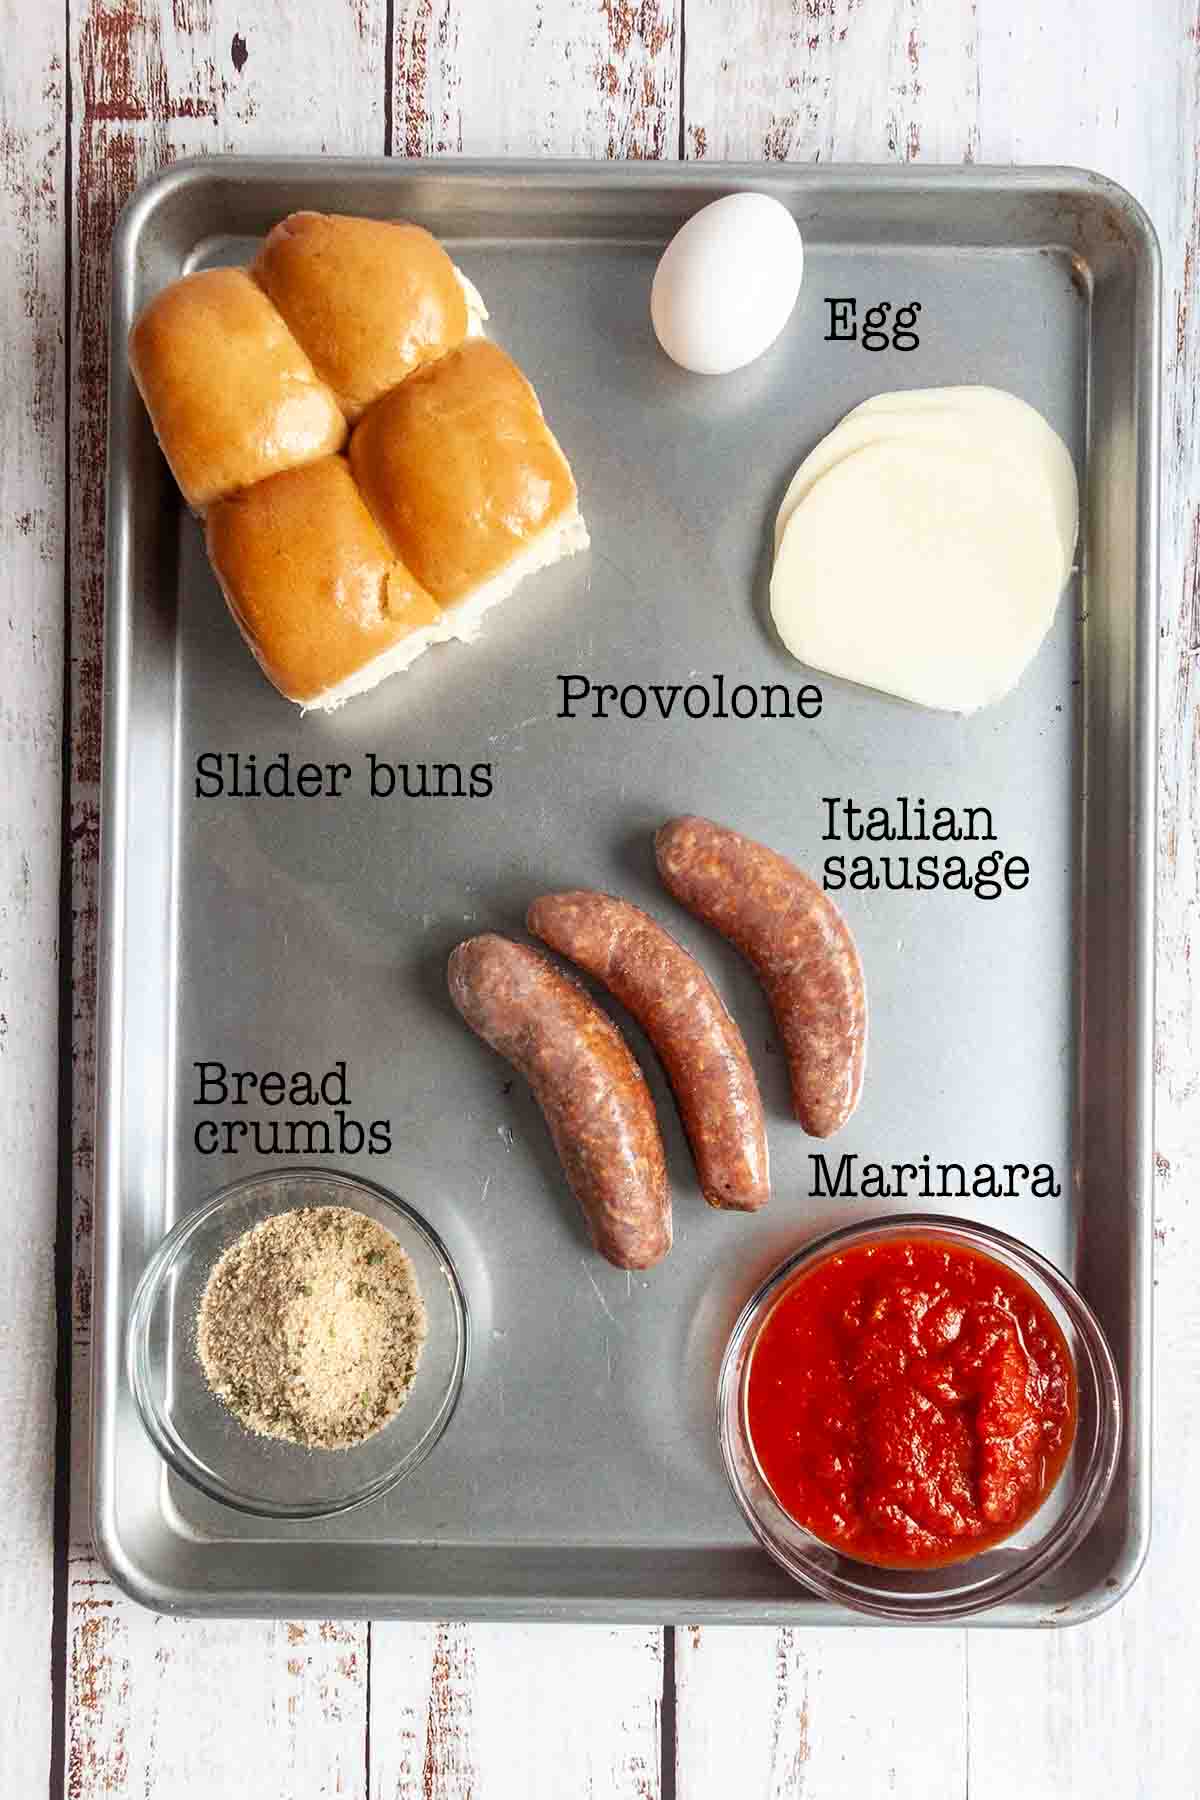 Ingredients for Italian sausage sliders--buns, Provolone, egg, sausage, bread crumbs, and marinara.